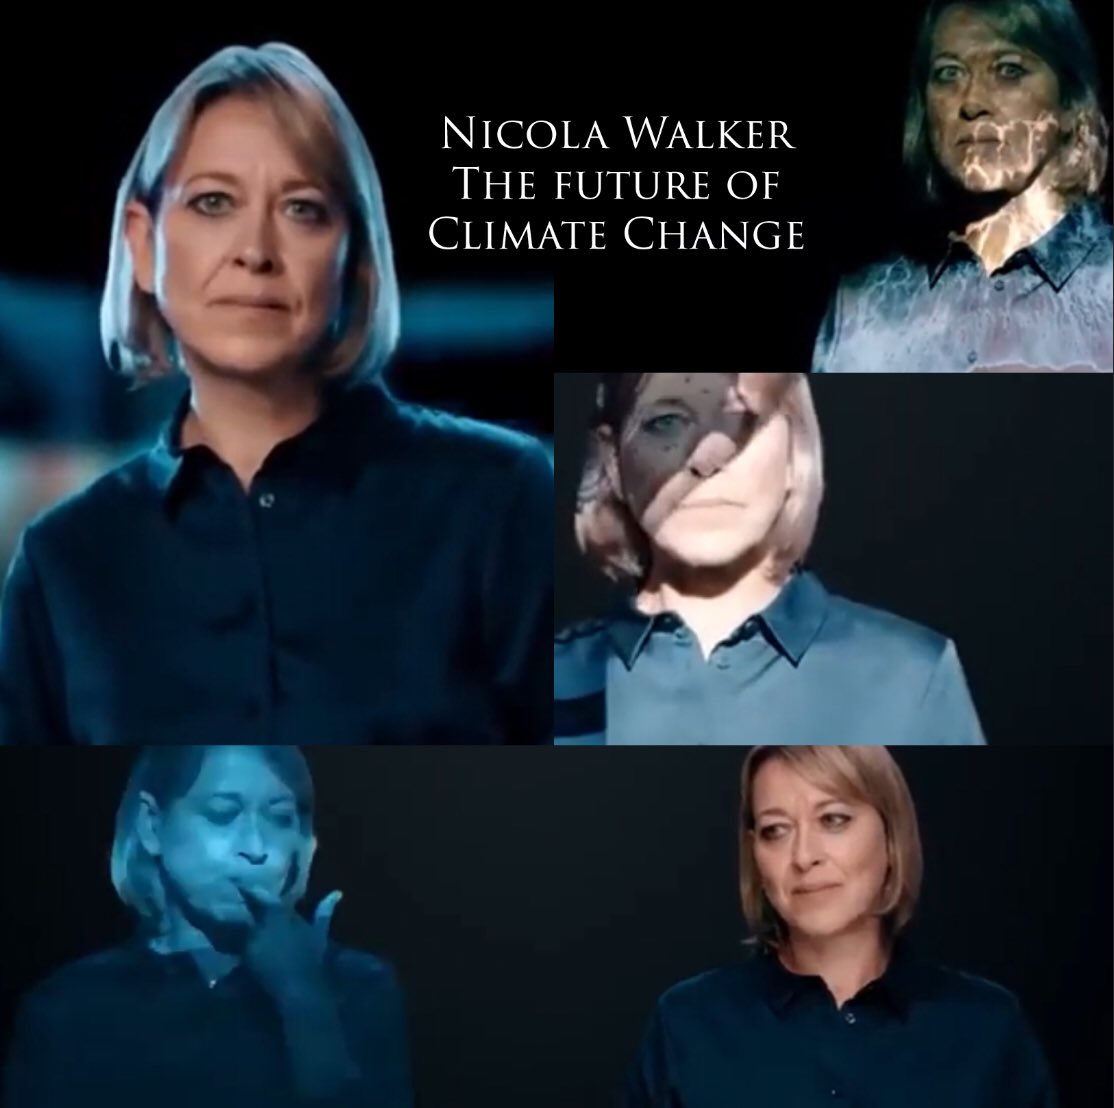 This is a really interesting presentation on #climatechange from 2019 with #NicolaWalker talking about ideas of the future and how we will look at this #superwickedproblem #wickedproblem #conservation #ClimateCrisis #conservationpsychology #ideas #future 

youtu.be/OVlivQfJgHU